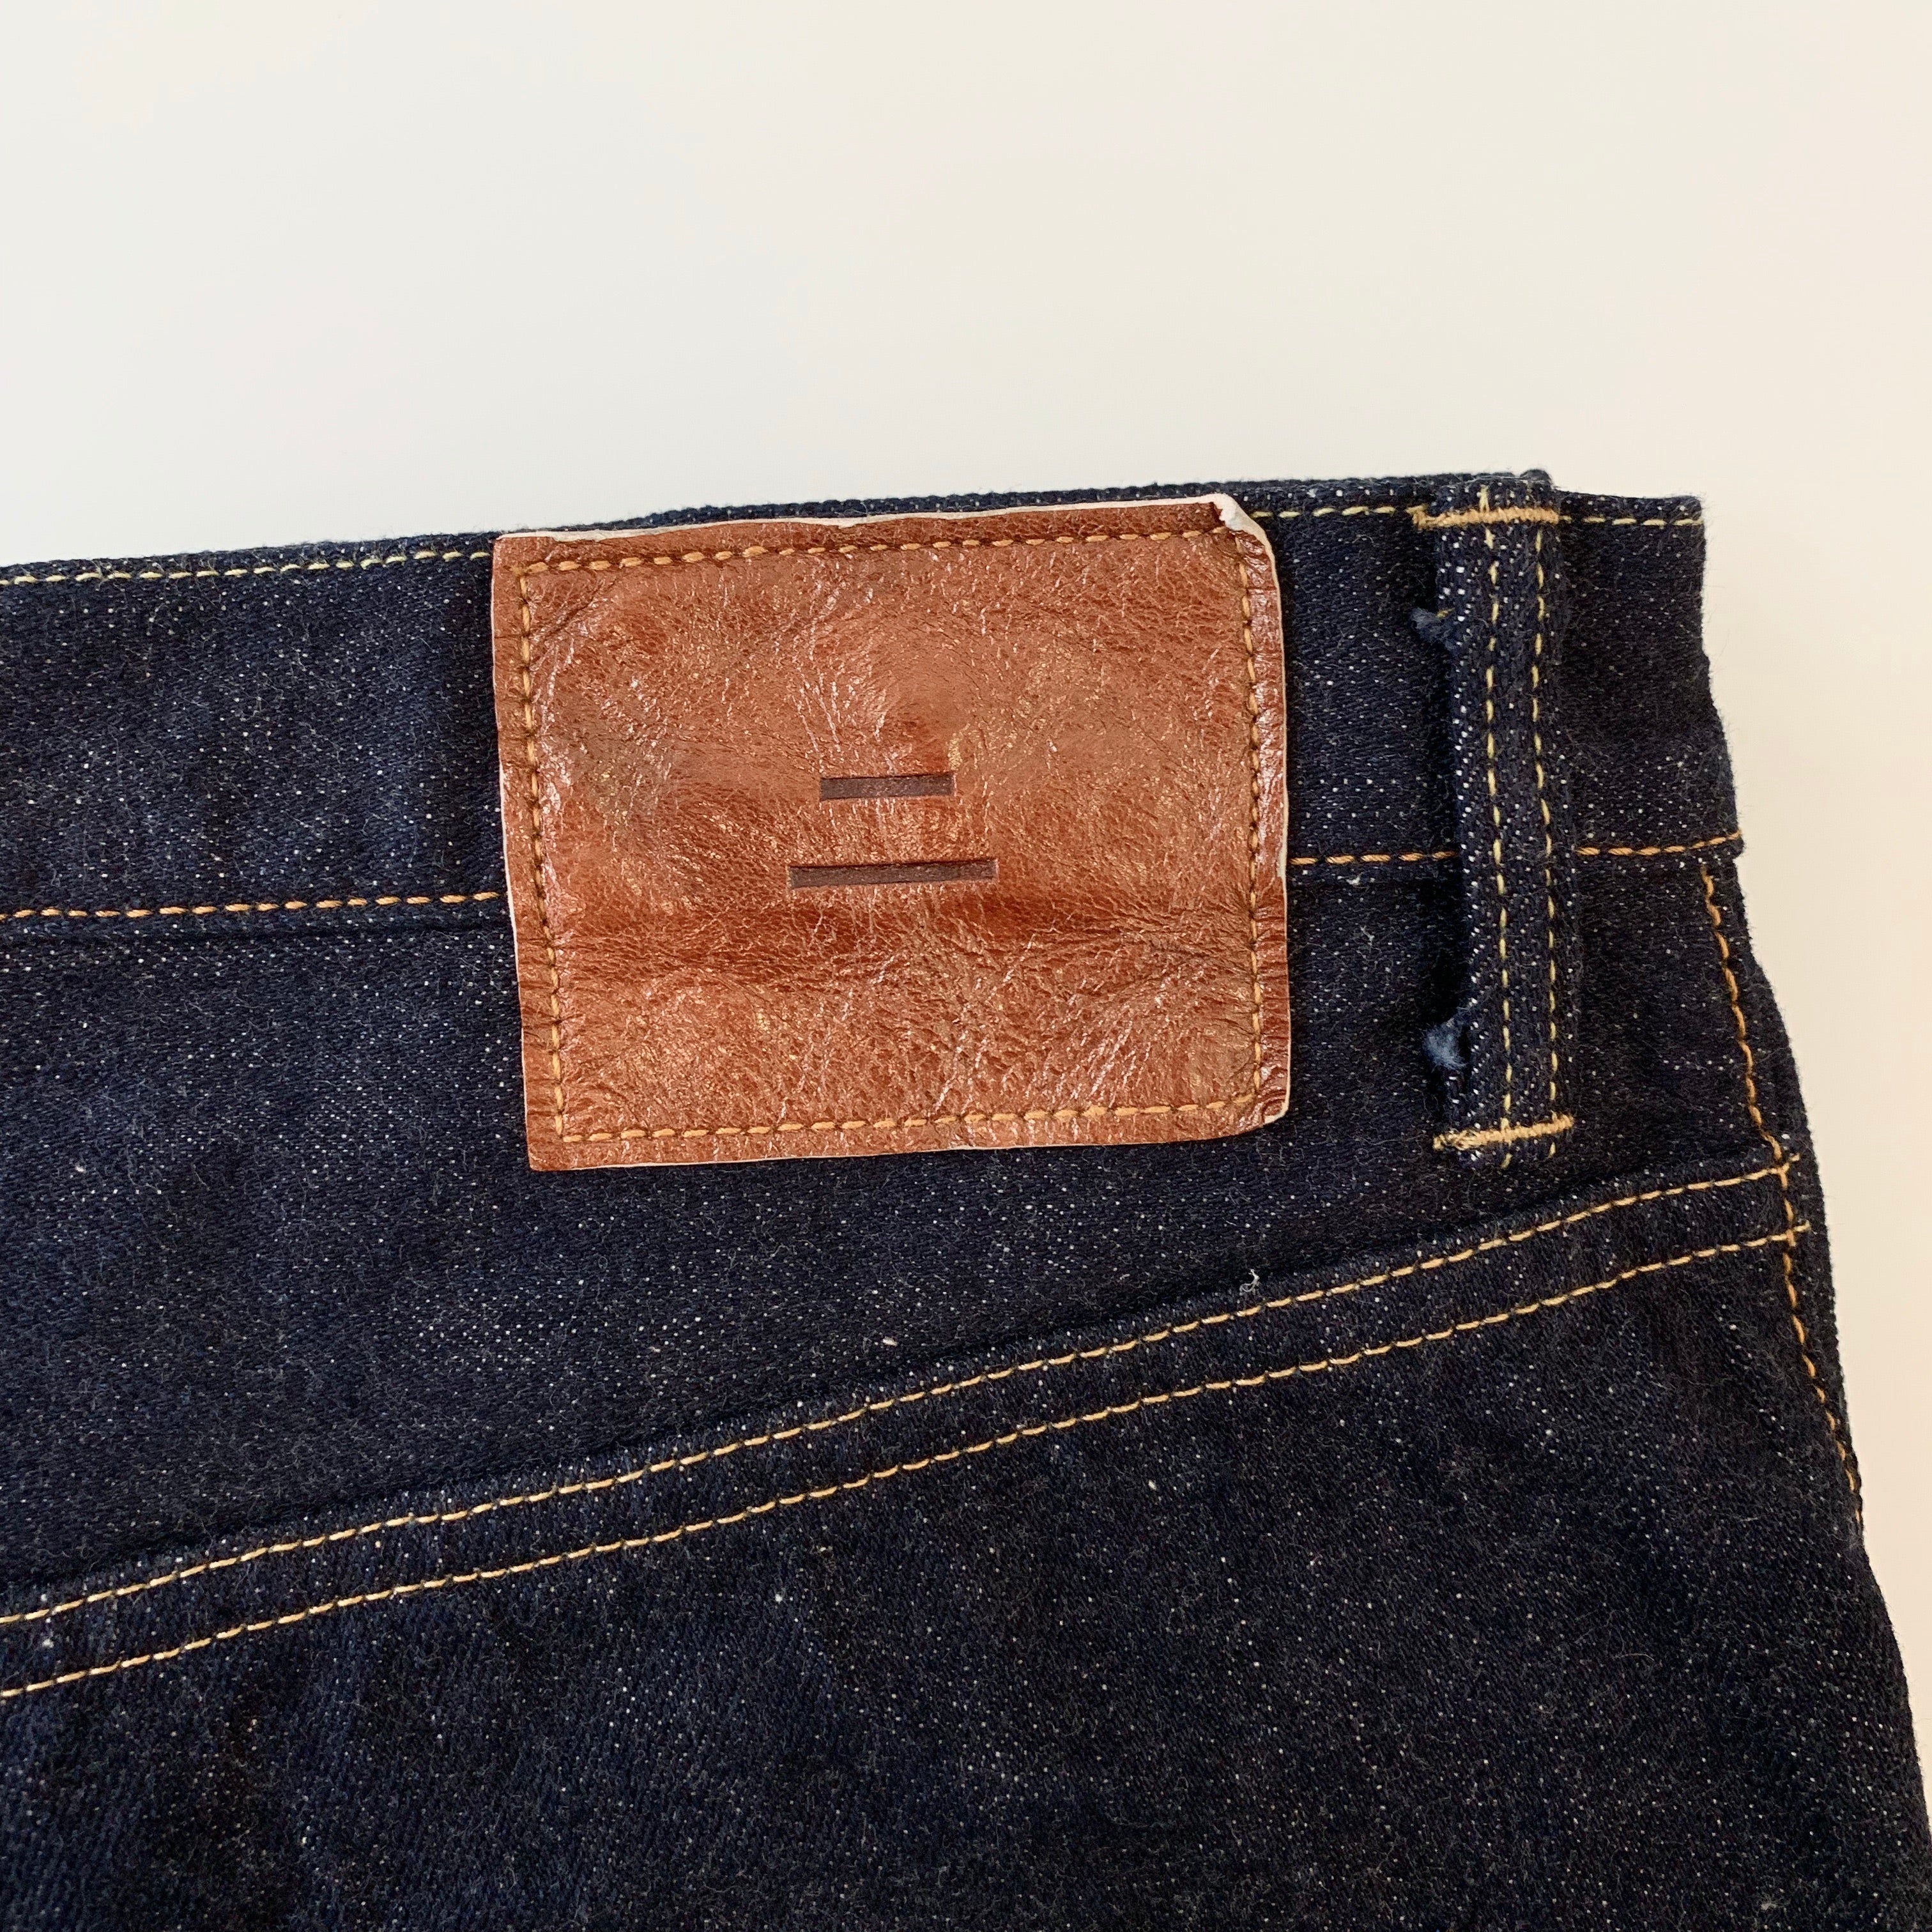 Naked & Famous True Guy Natural Indigo Selvedge Denim – The Thirty-First Co.